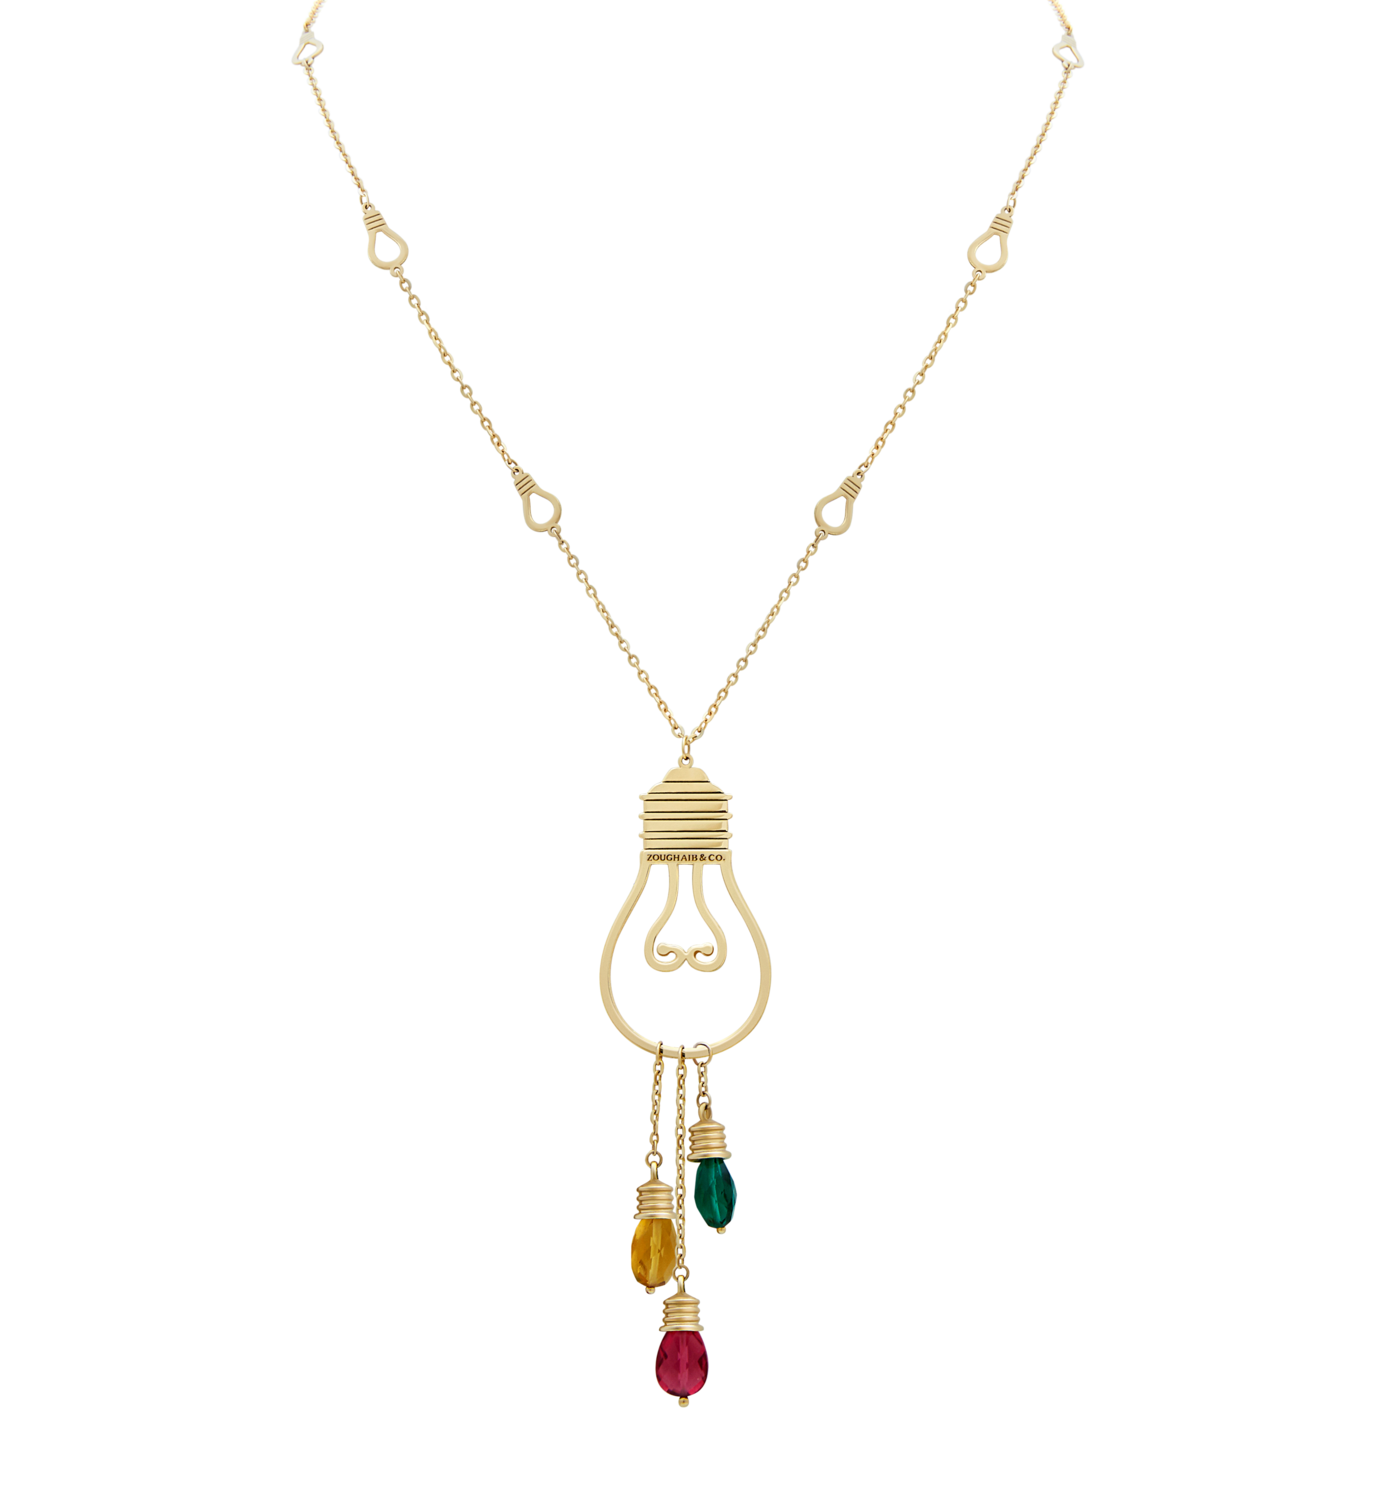 Light Gold Necklace with Colored Stones